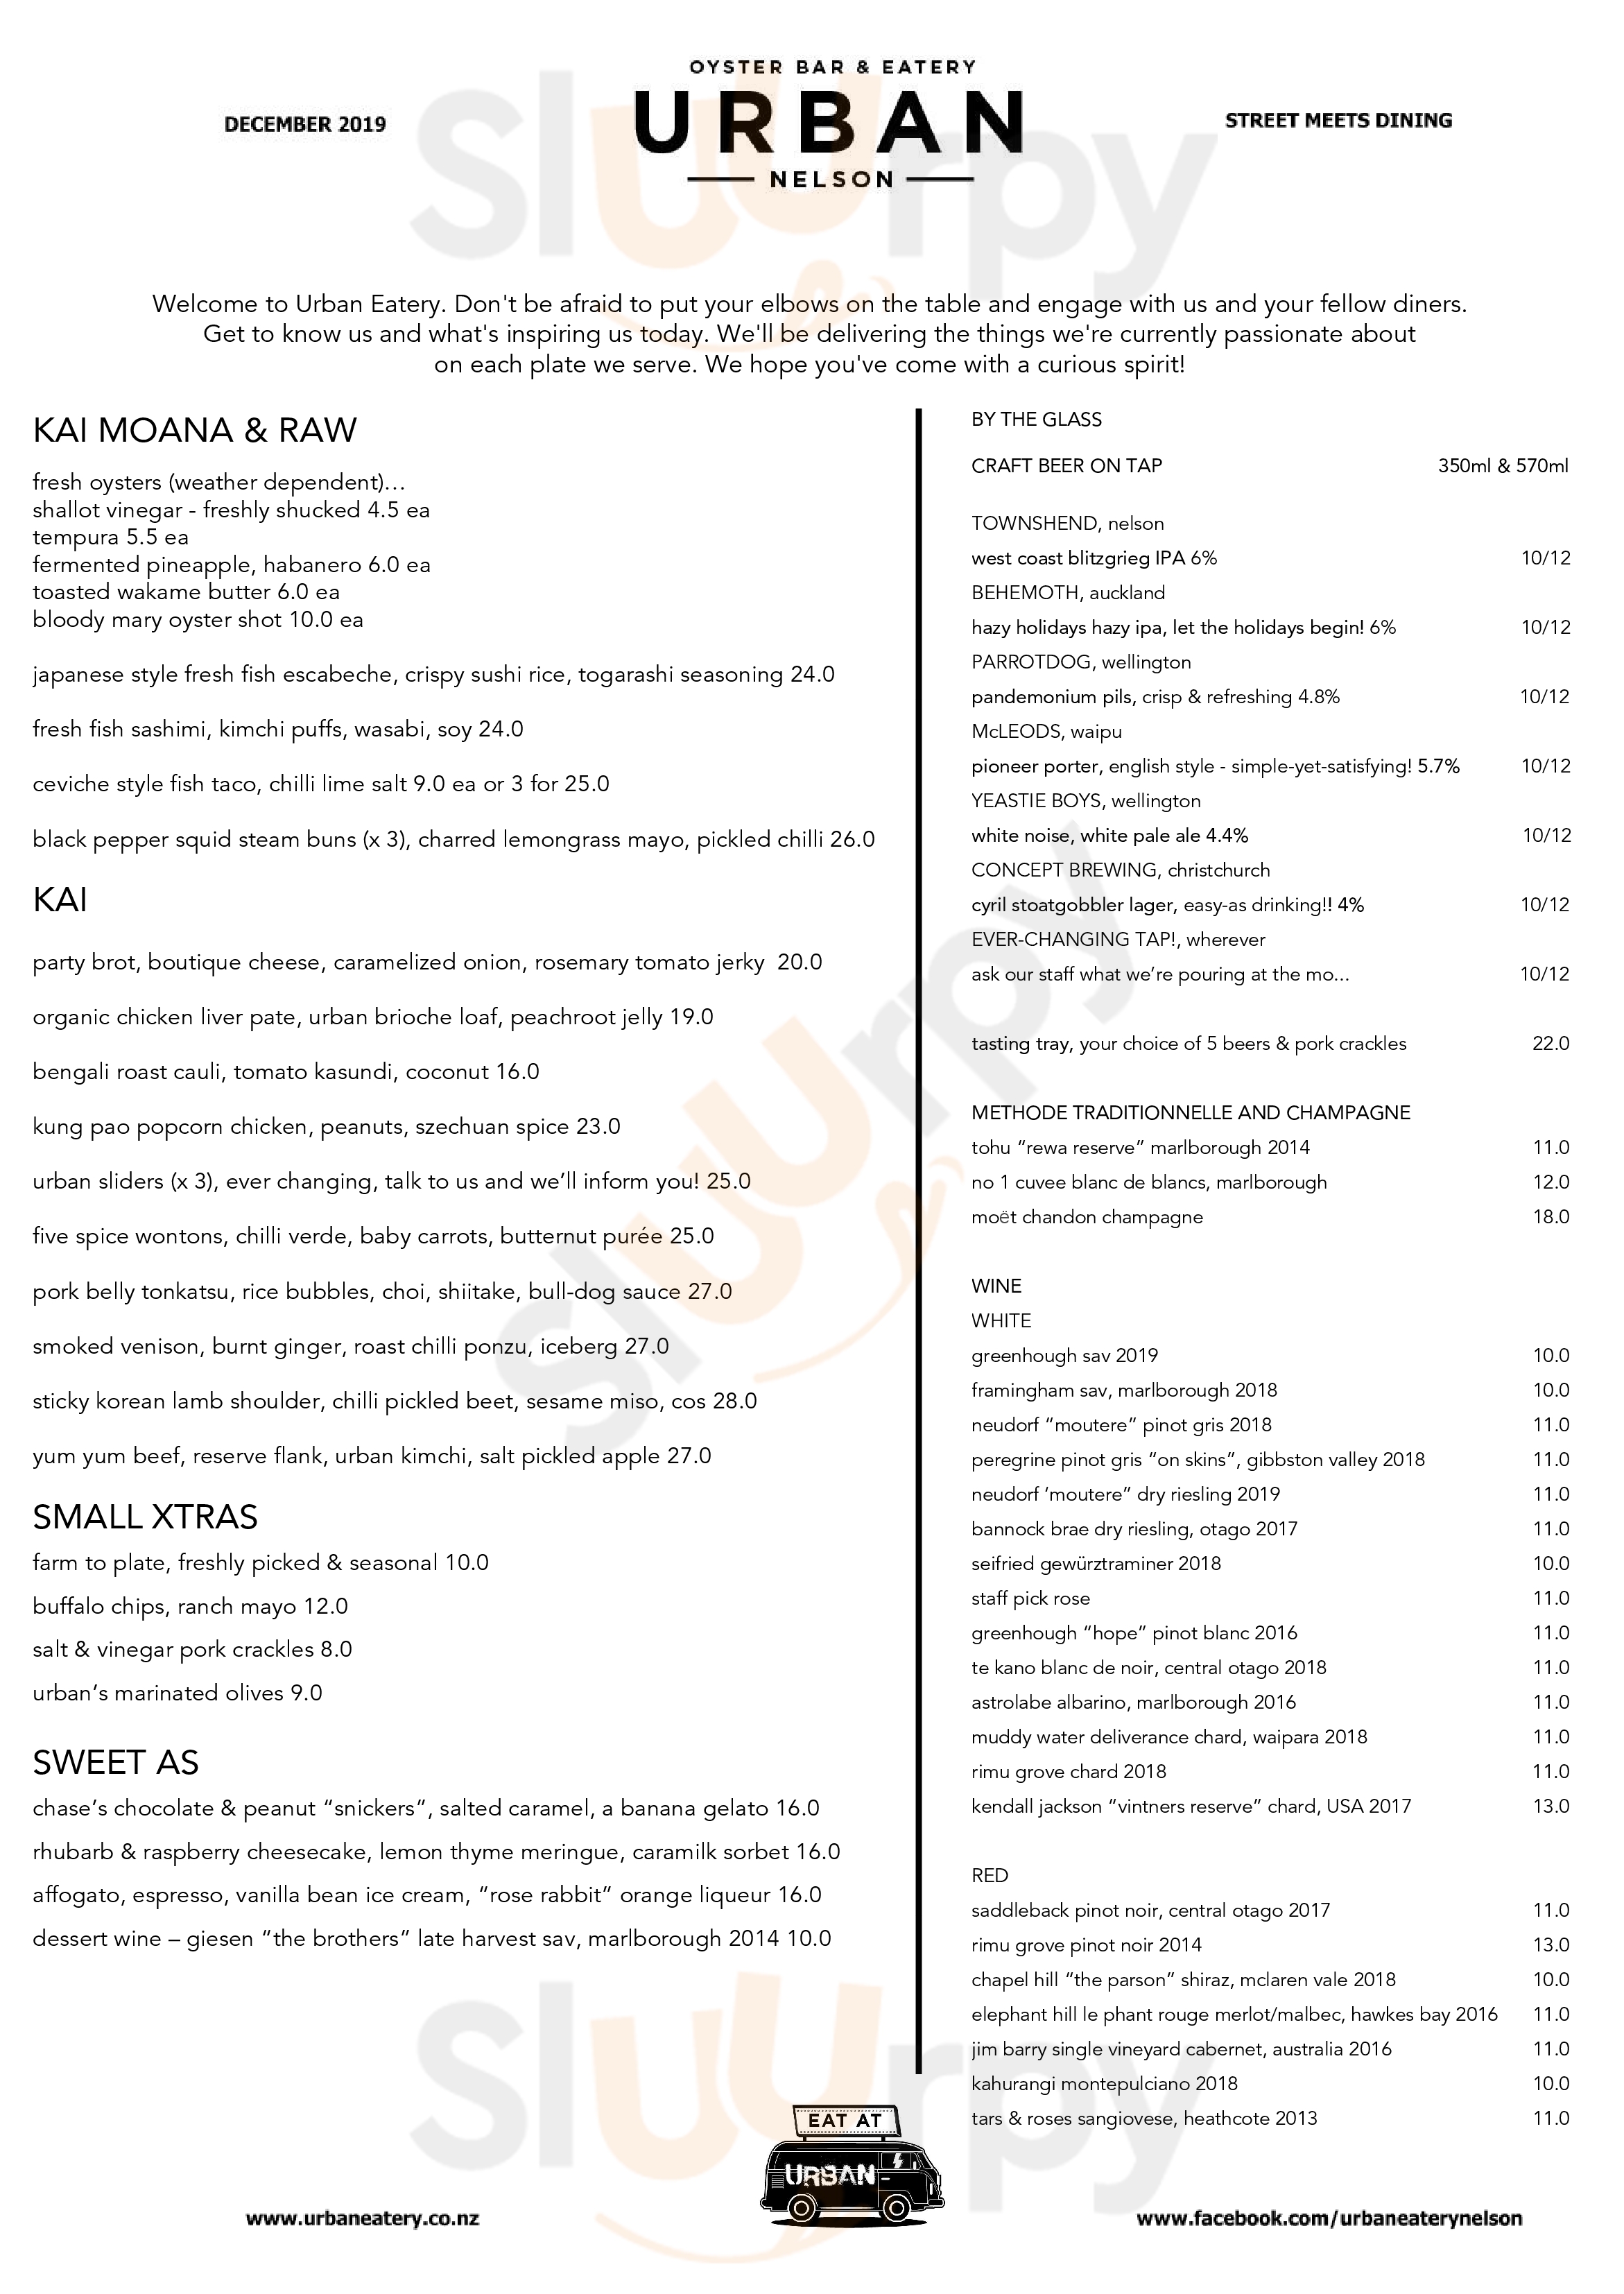 Urban Oyster Bar And Eatery Nelson Menu - 1